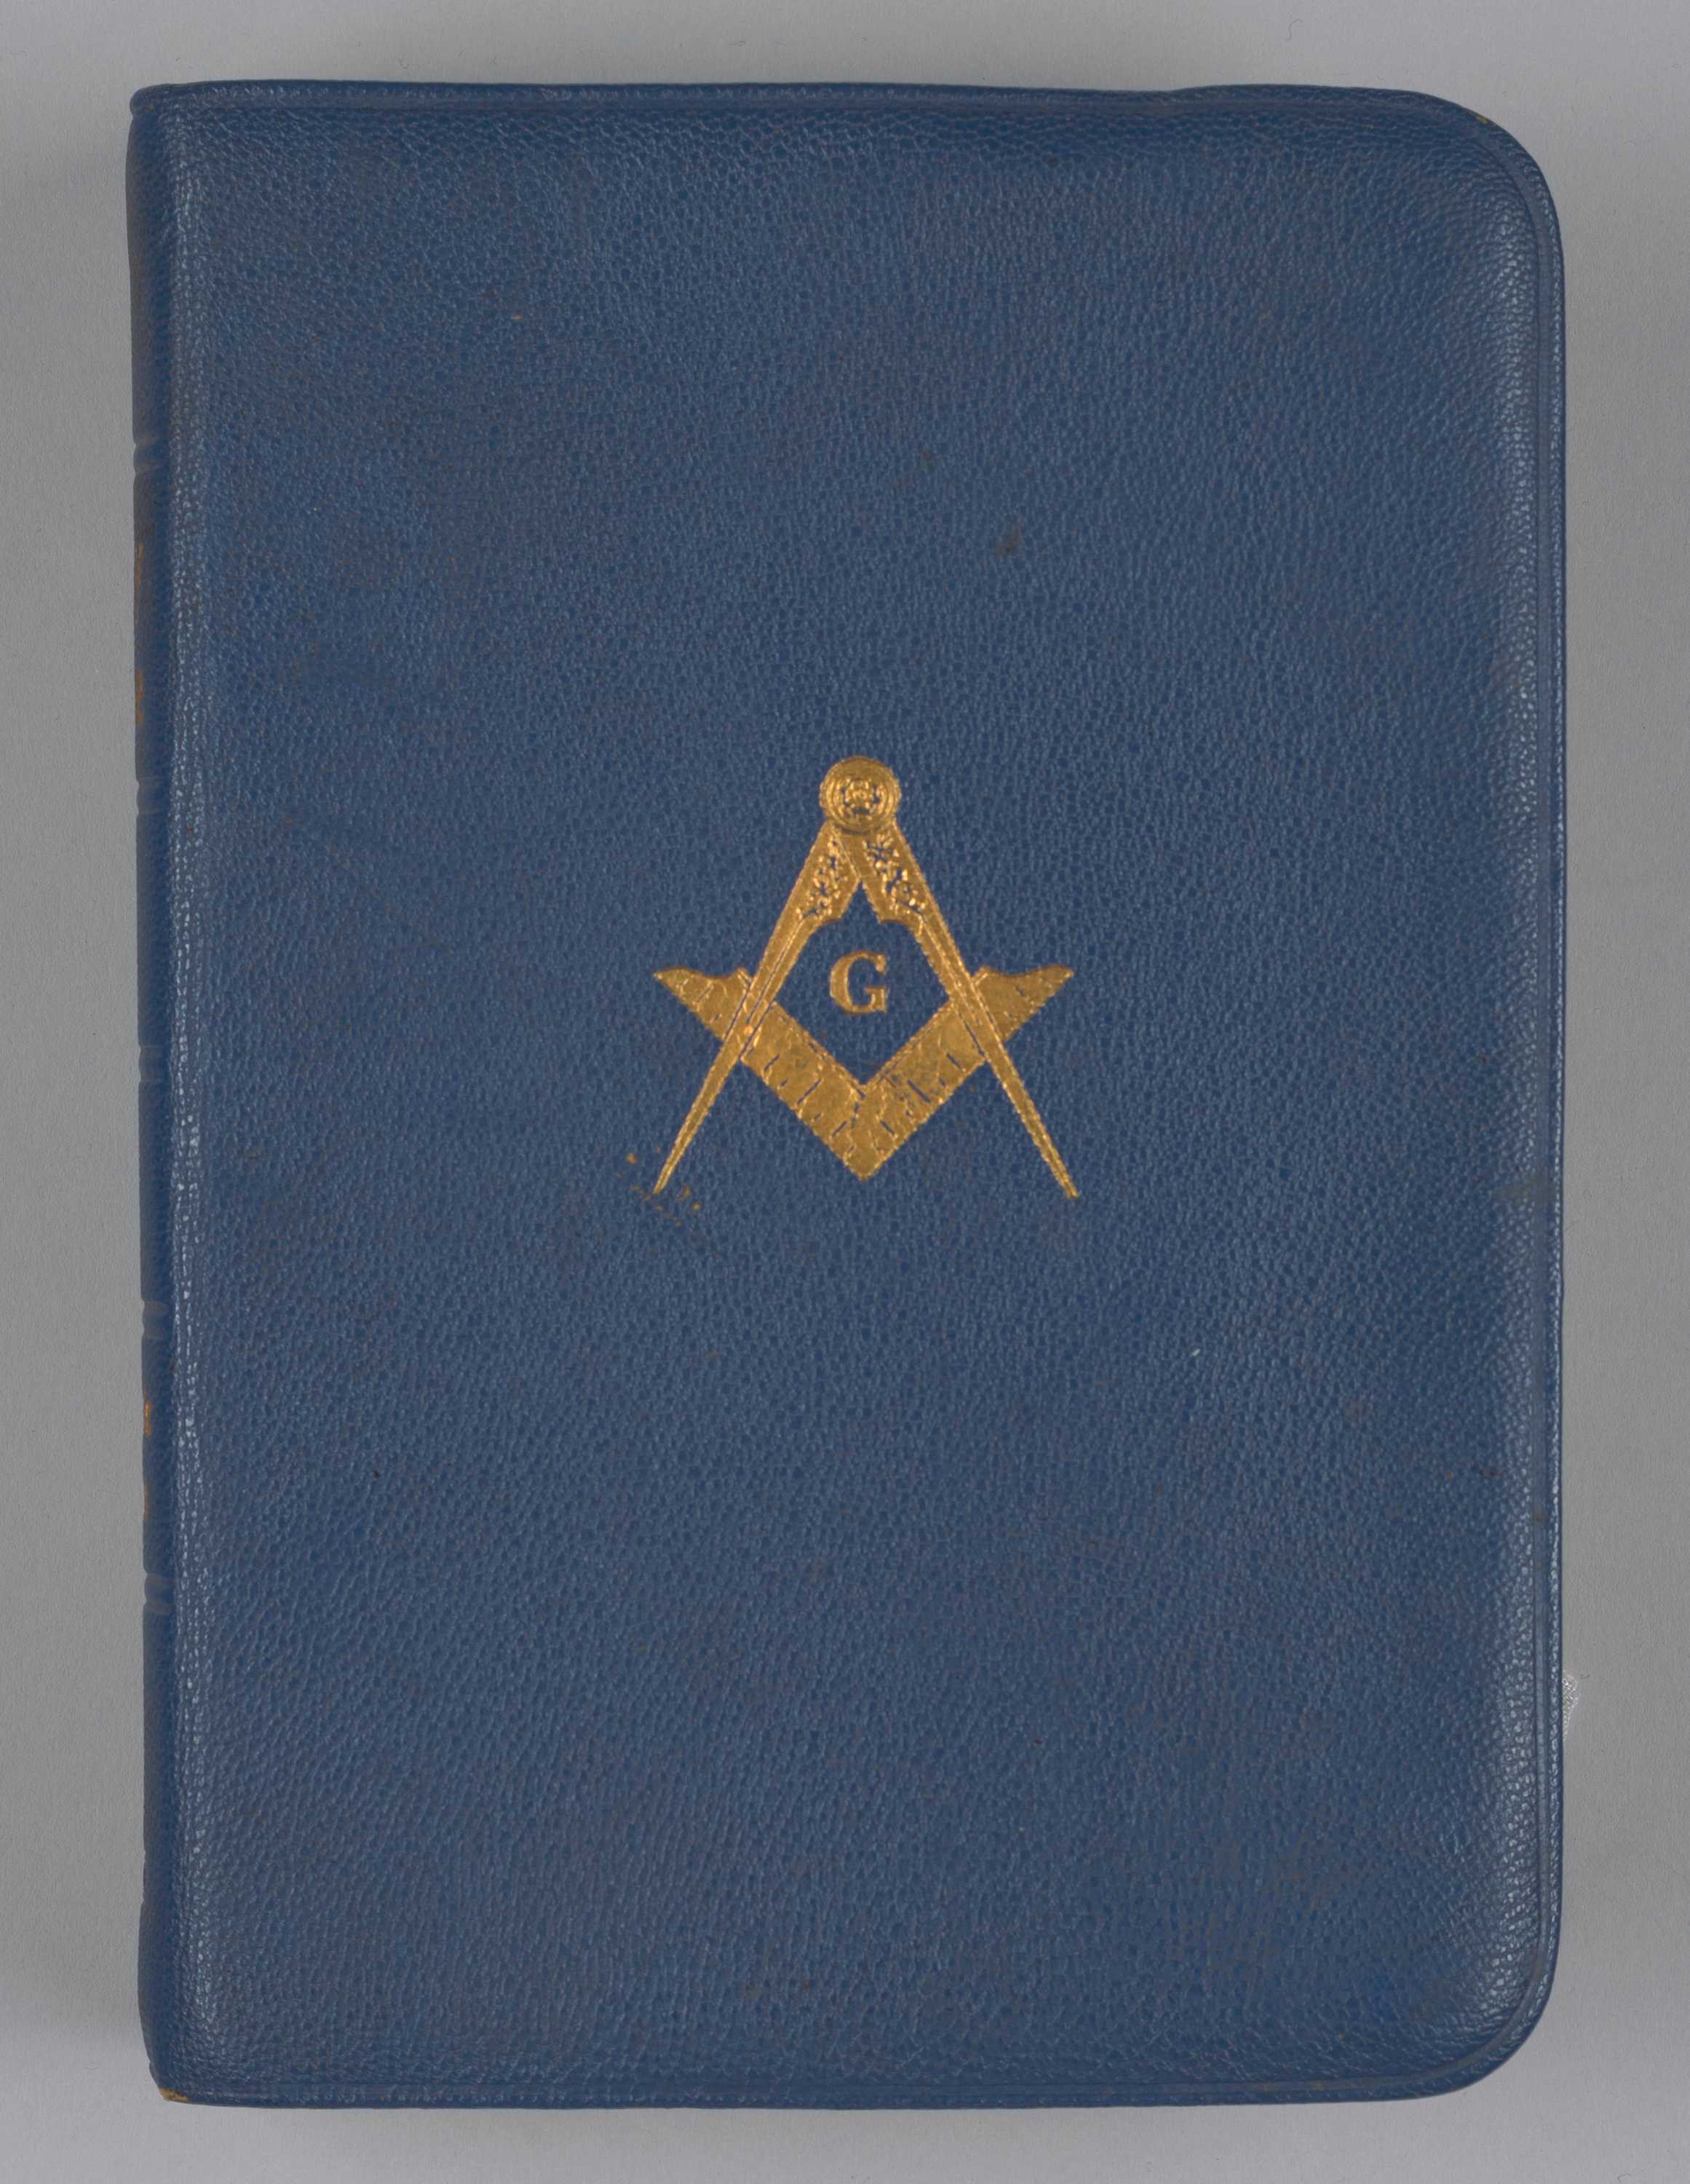 This publication of The Holy Bible is bound in blue leather with the symbol of Freemasonry on the front.